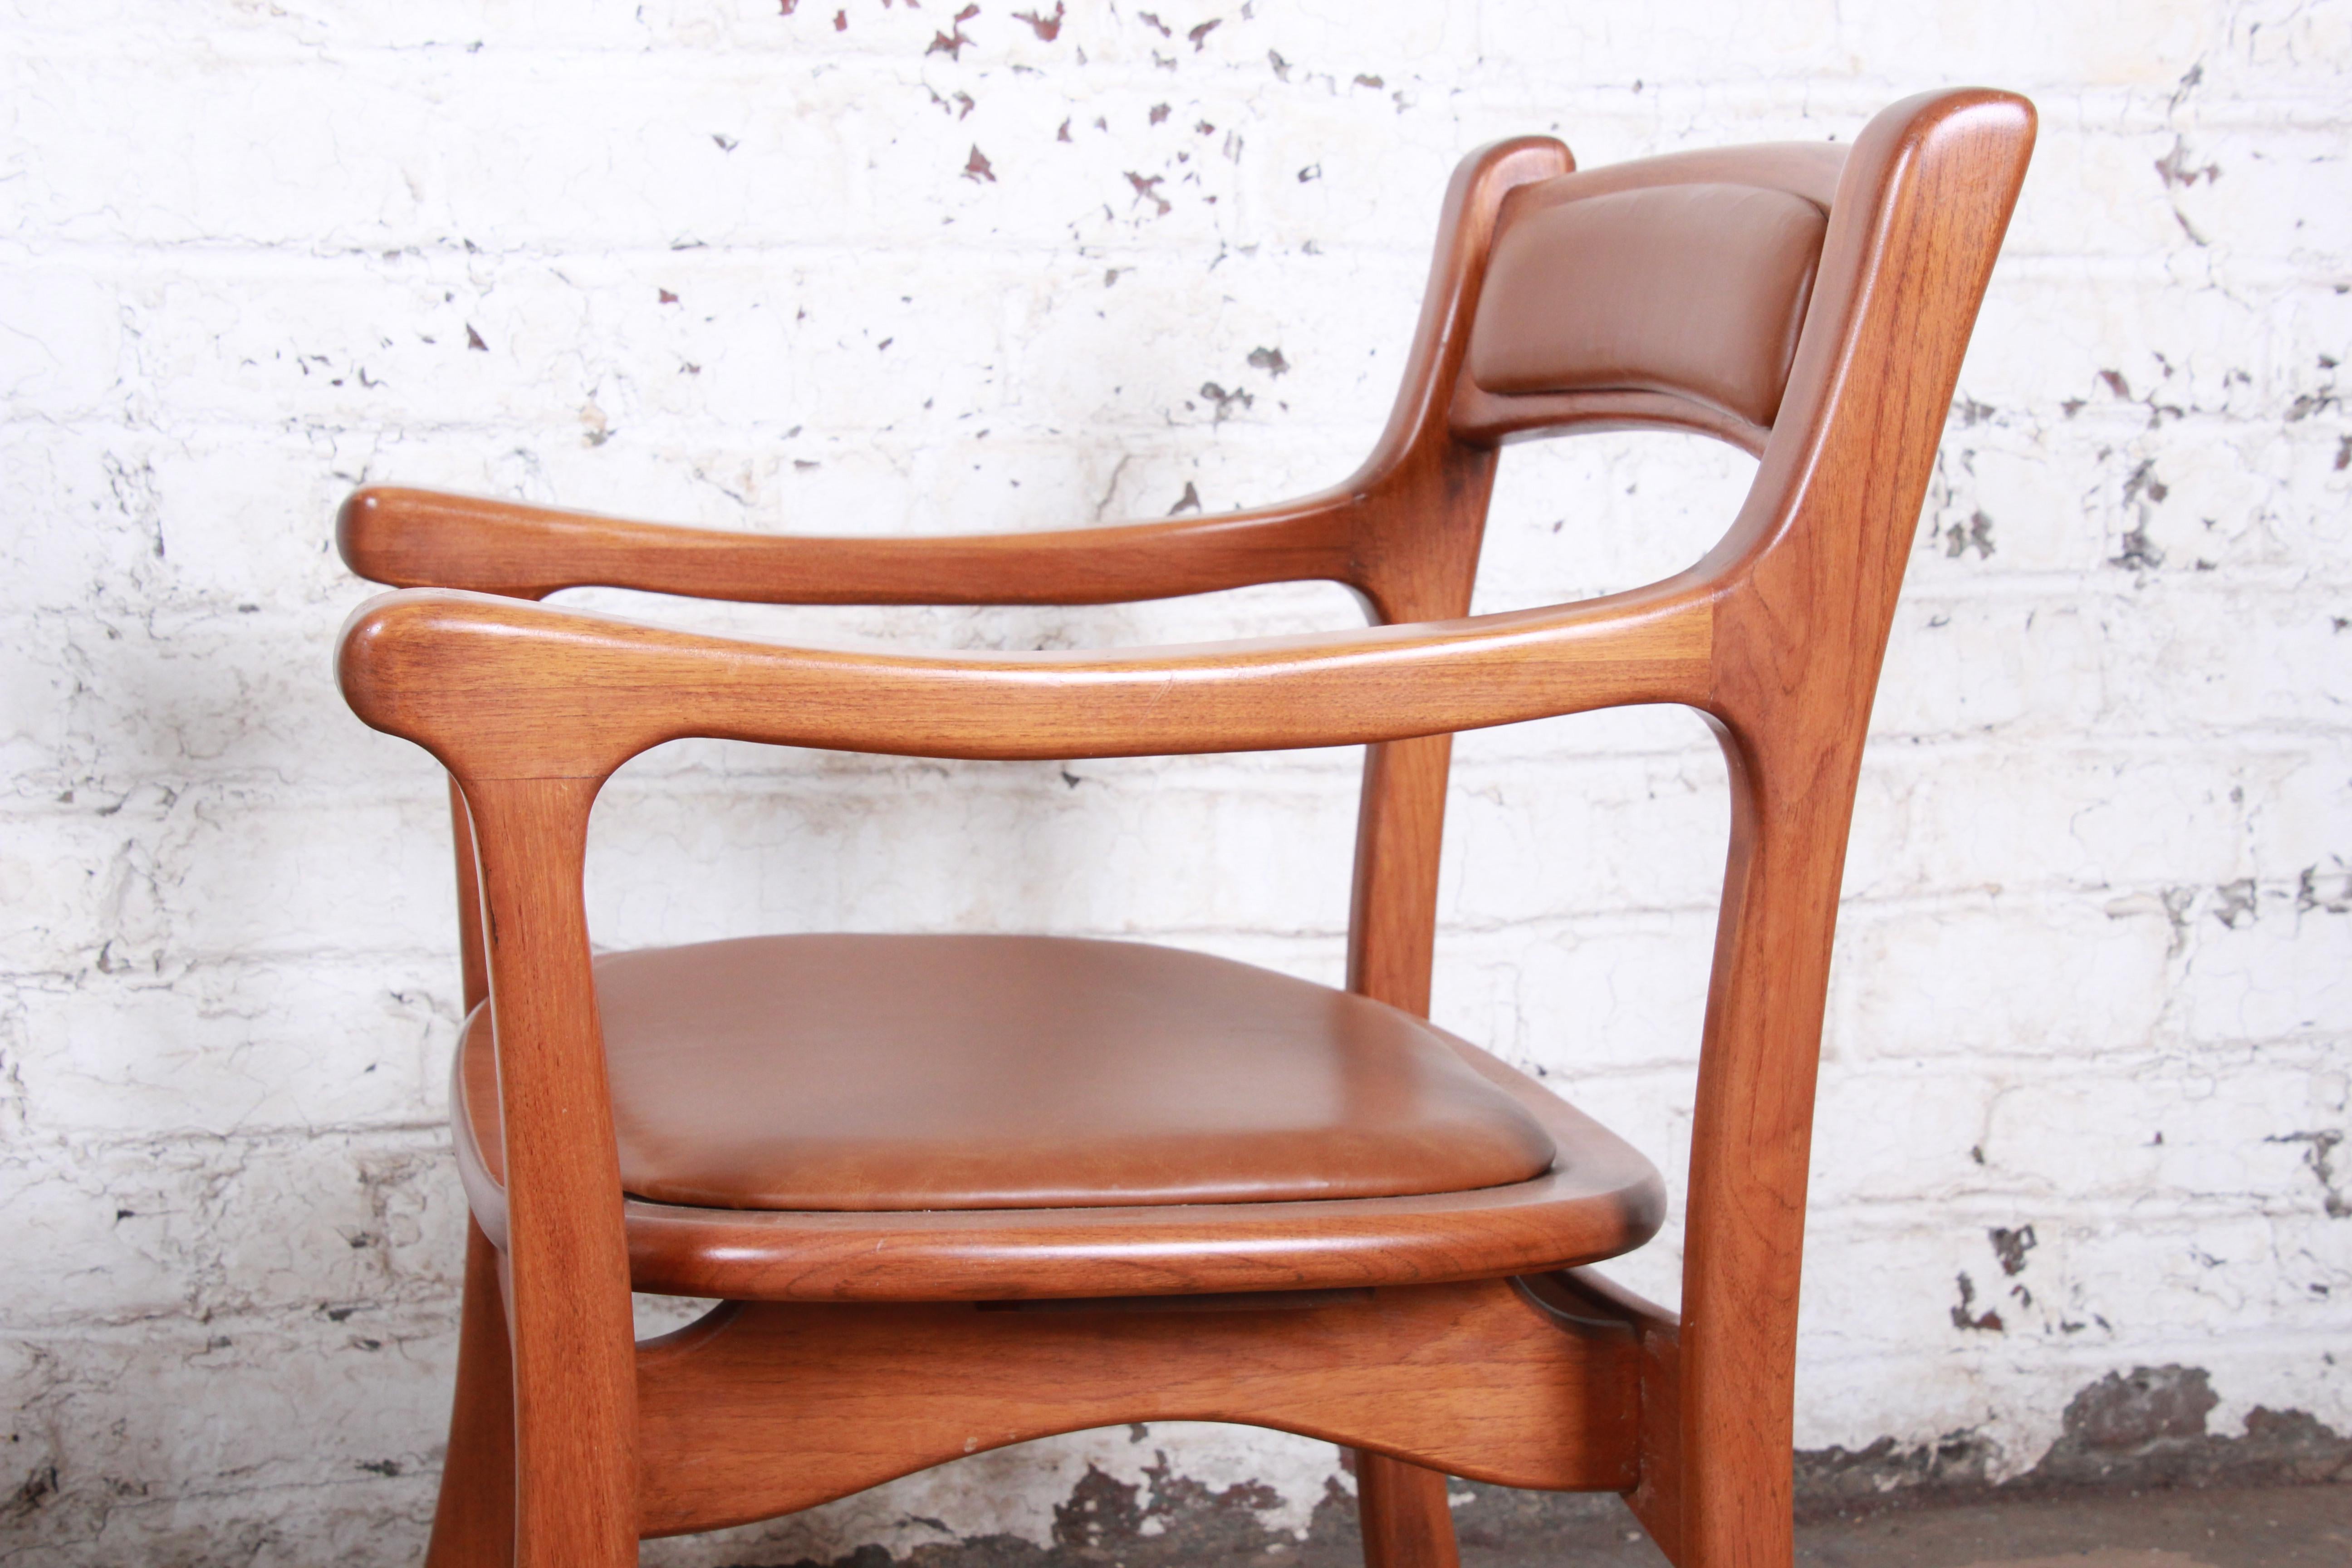 Sculpted Solid Teak and Leather Studio Crafted Club Chairs, circa 1960s For Sale 4